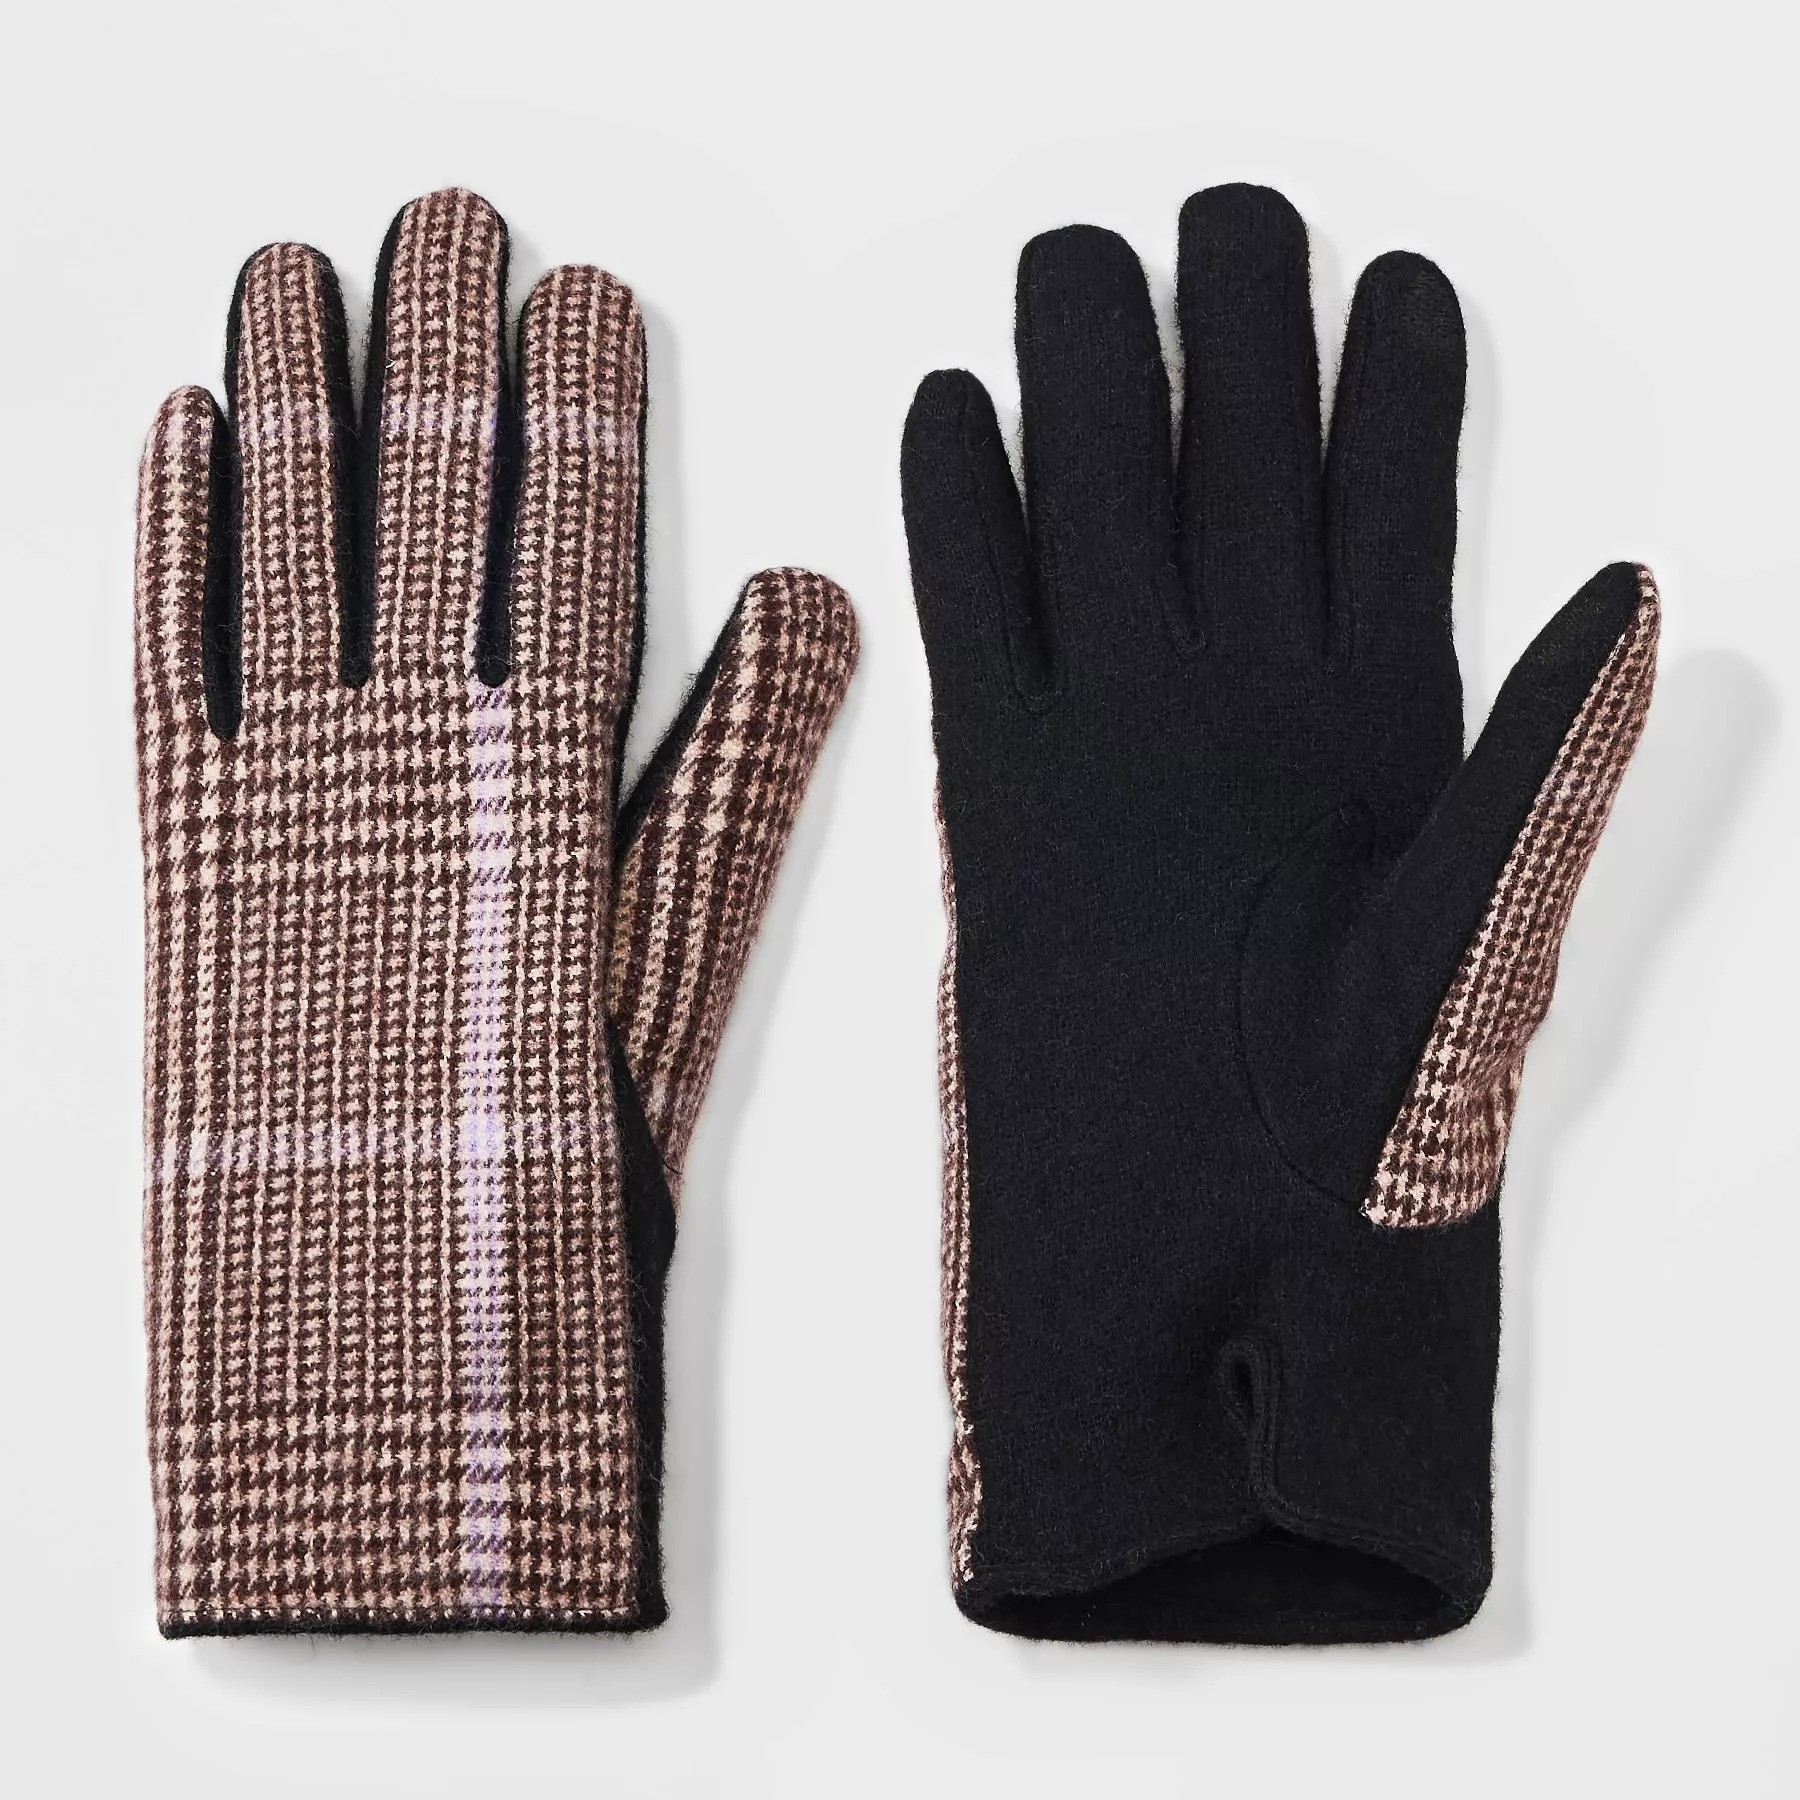 The gloves, which have a pink plaid design on one side and plain black on the other